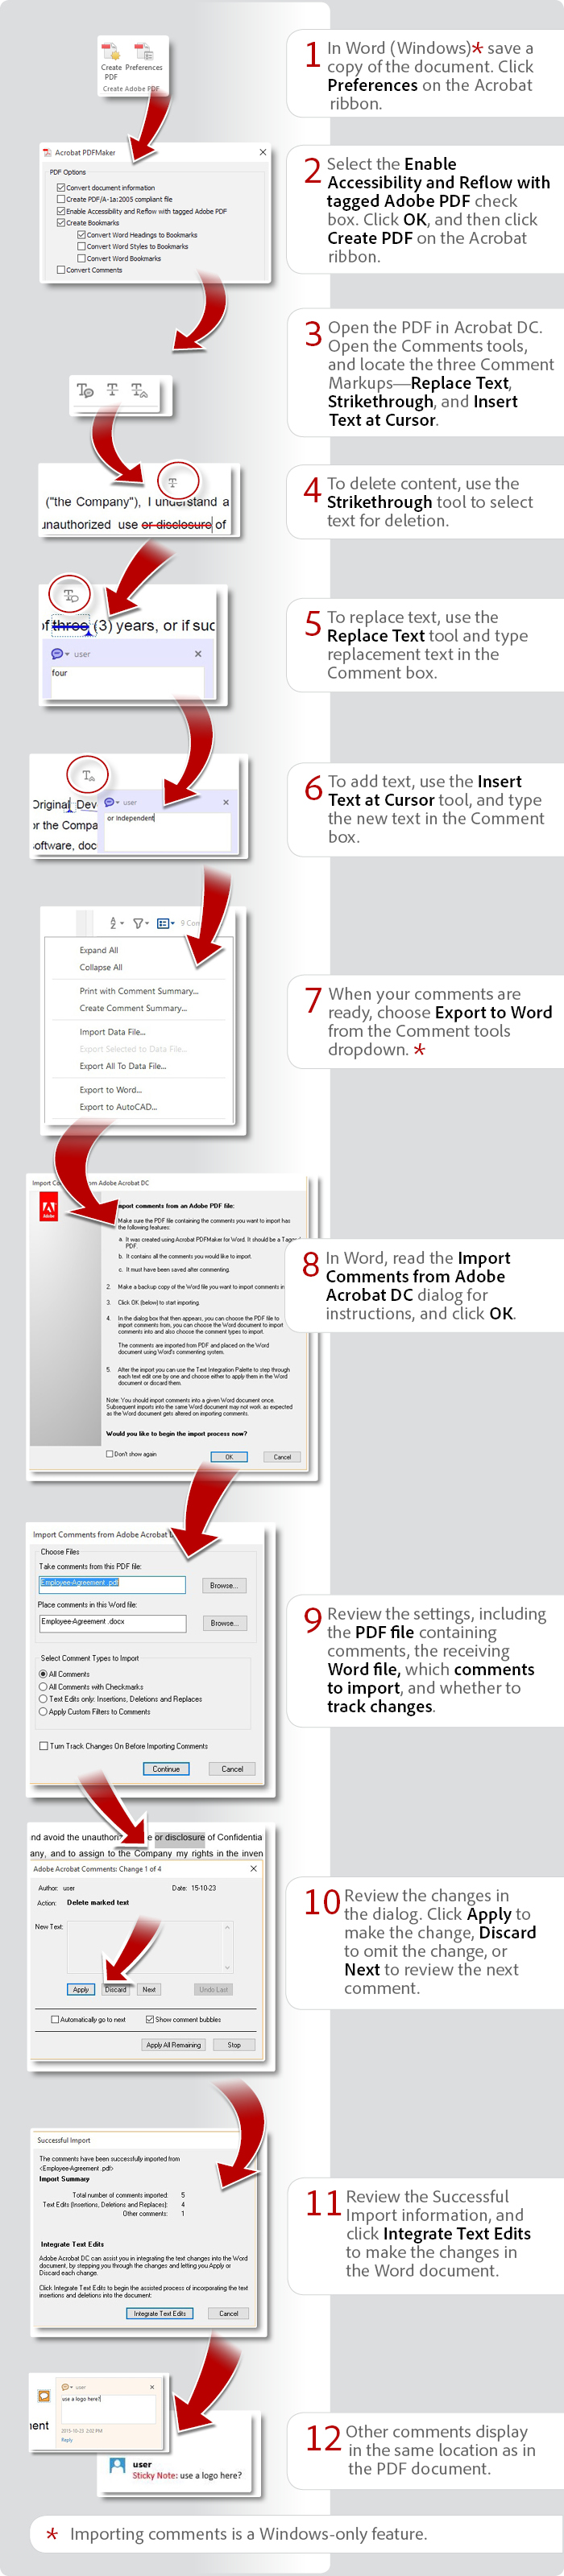 Export PDF comments to Word with Acrobat DC